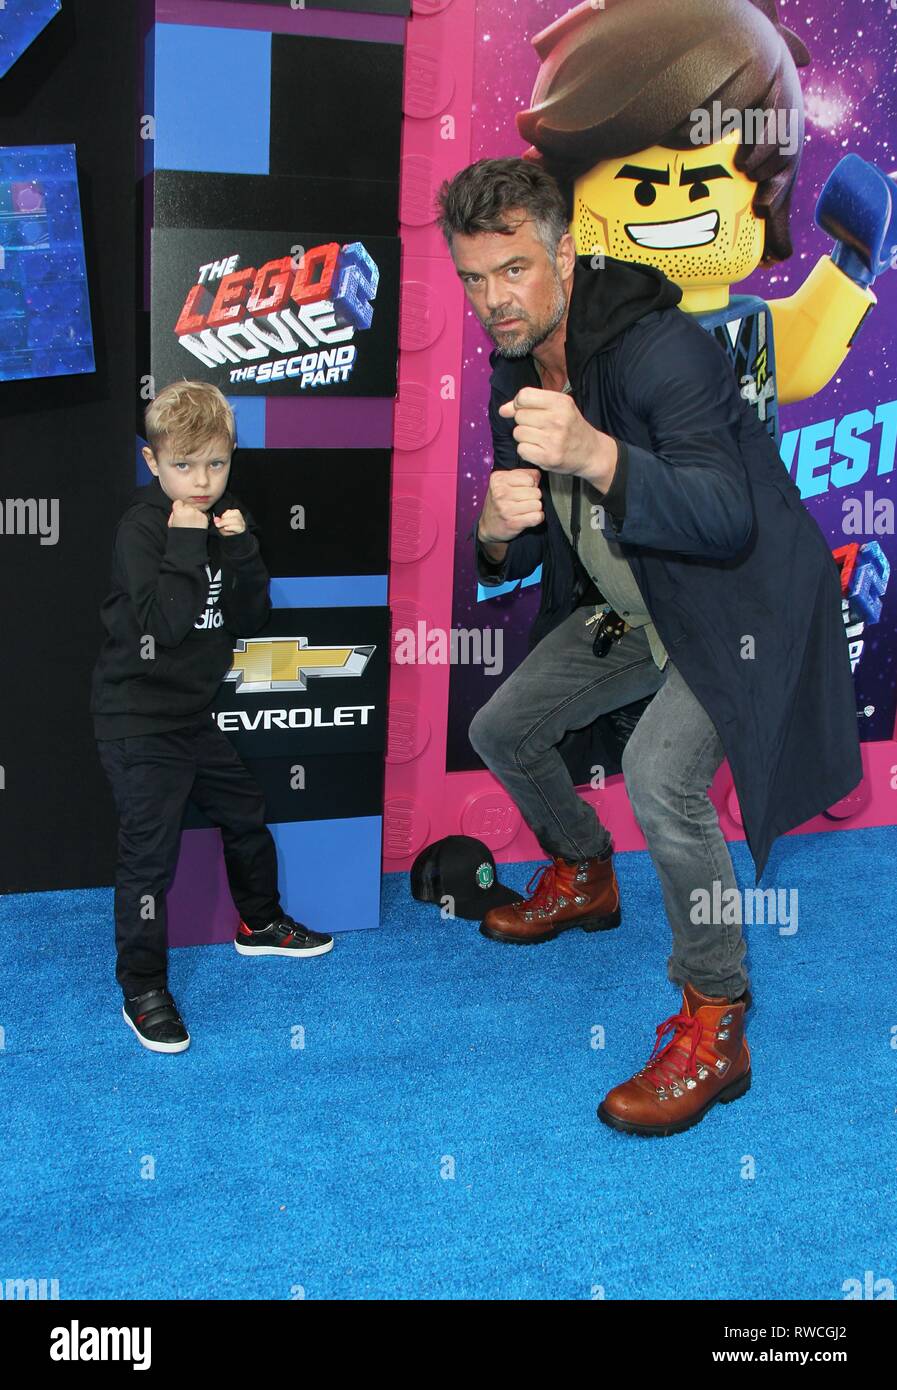 'The Lego Movie 2: The Second Part' World Premiere held at the Regency Village Theatre  Featuring: Josh Duhamel, son Axl Jack Duhamel Where: Los Angeles, California, United States When: 02 Feb 2019 Credit: Adriana M. Barraza/WENN.com Stock Photo